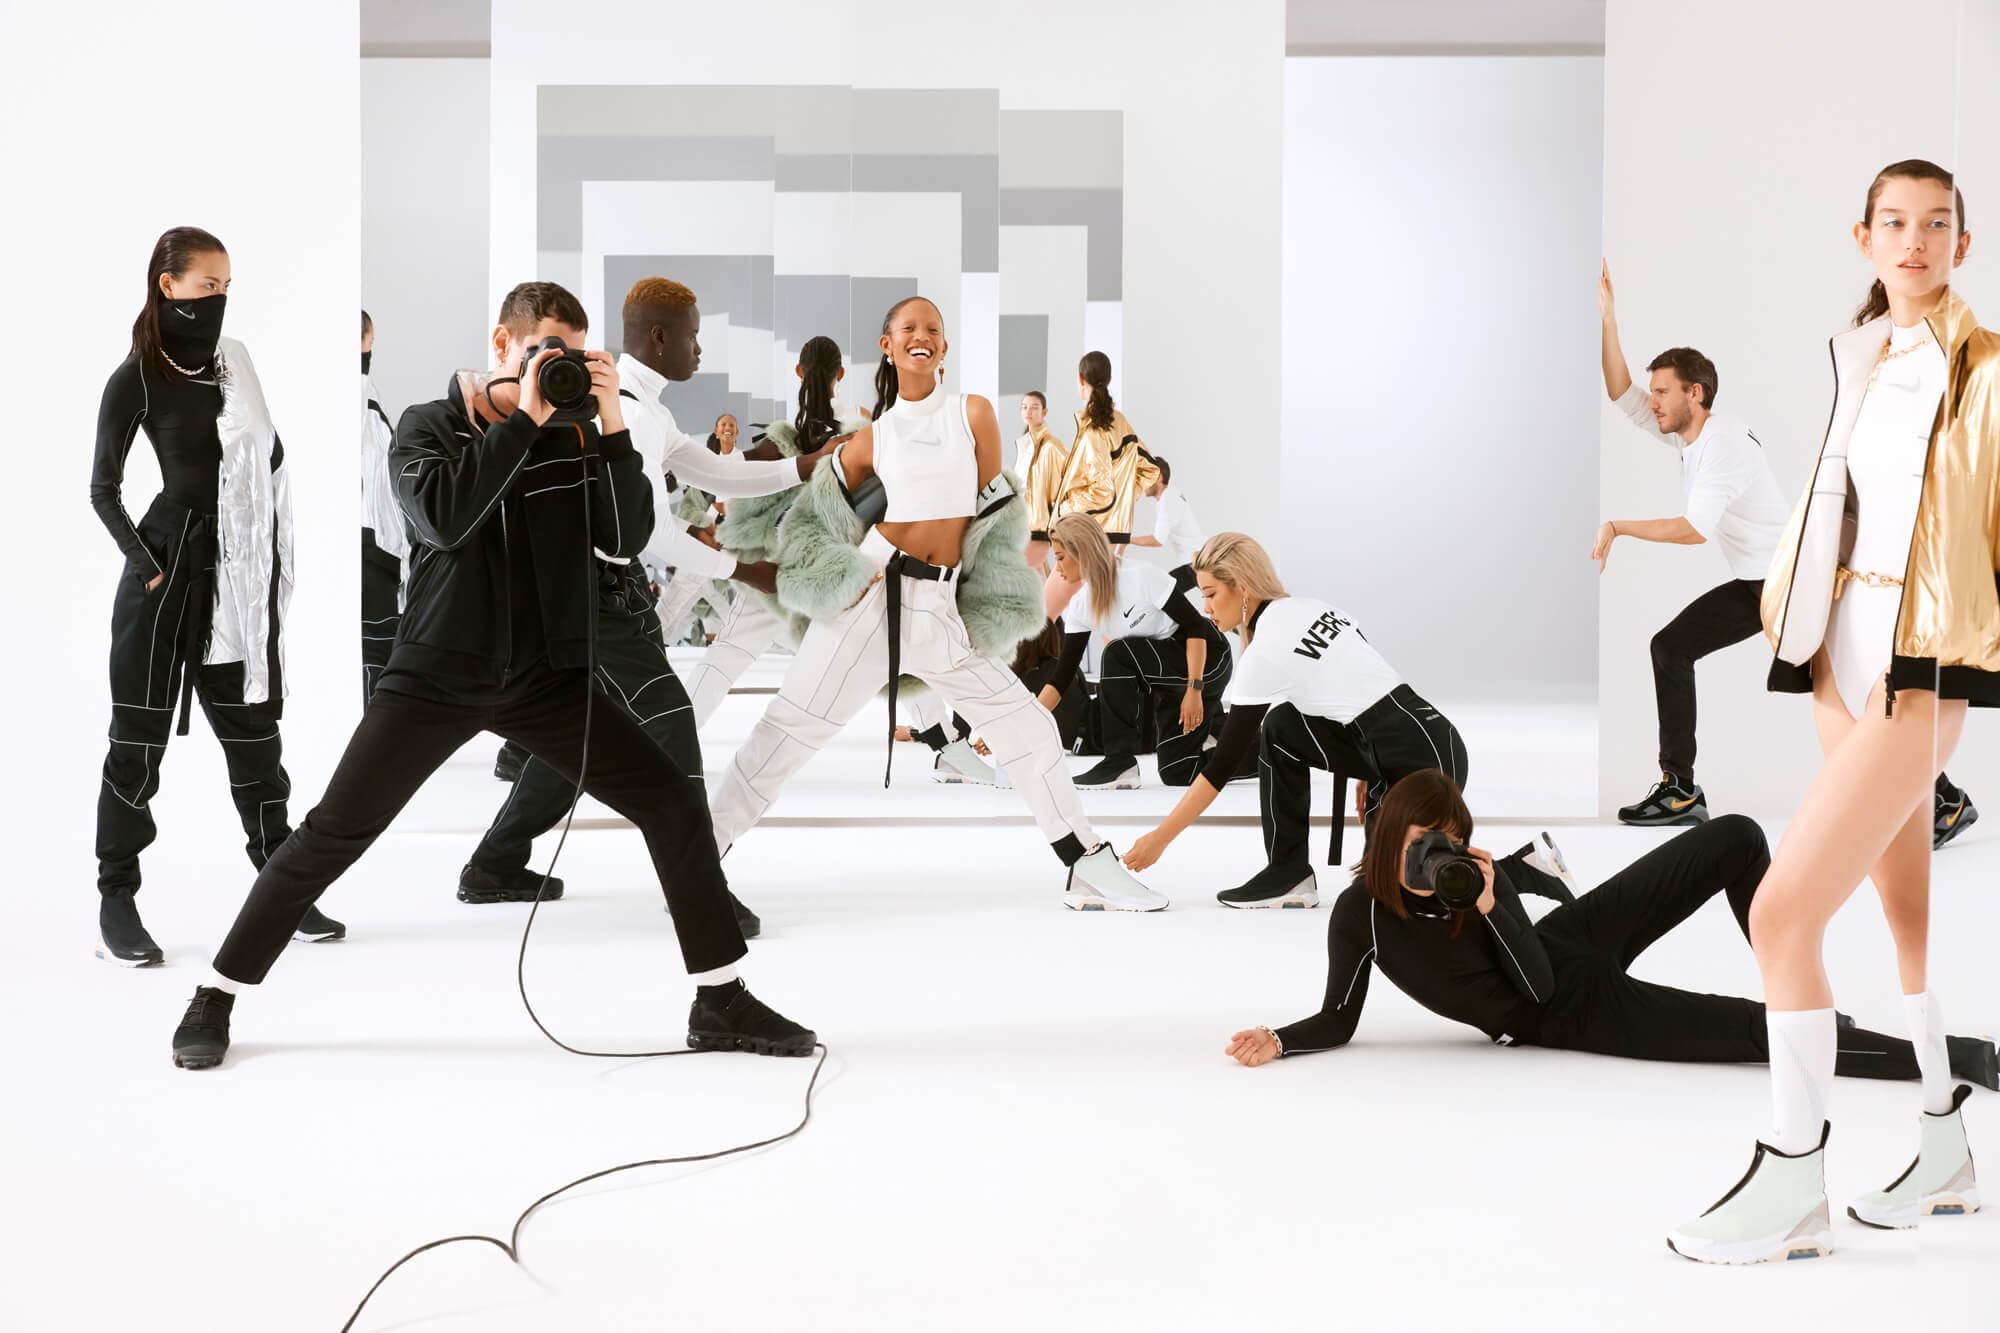 Nike x Ambush, ‘Creative Athletes’ Campaign - The BTS of the shoot became the campaign, celebrating the athleticism of the creative team that work behind the camera to being a shoot to life